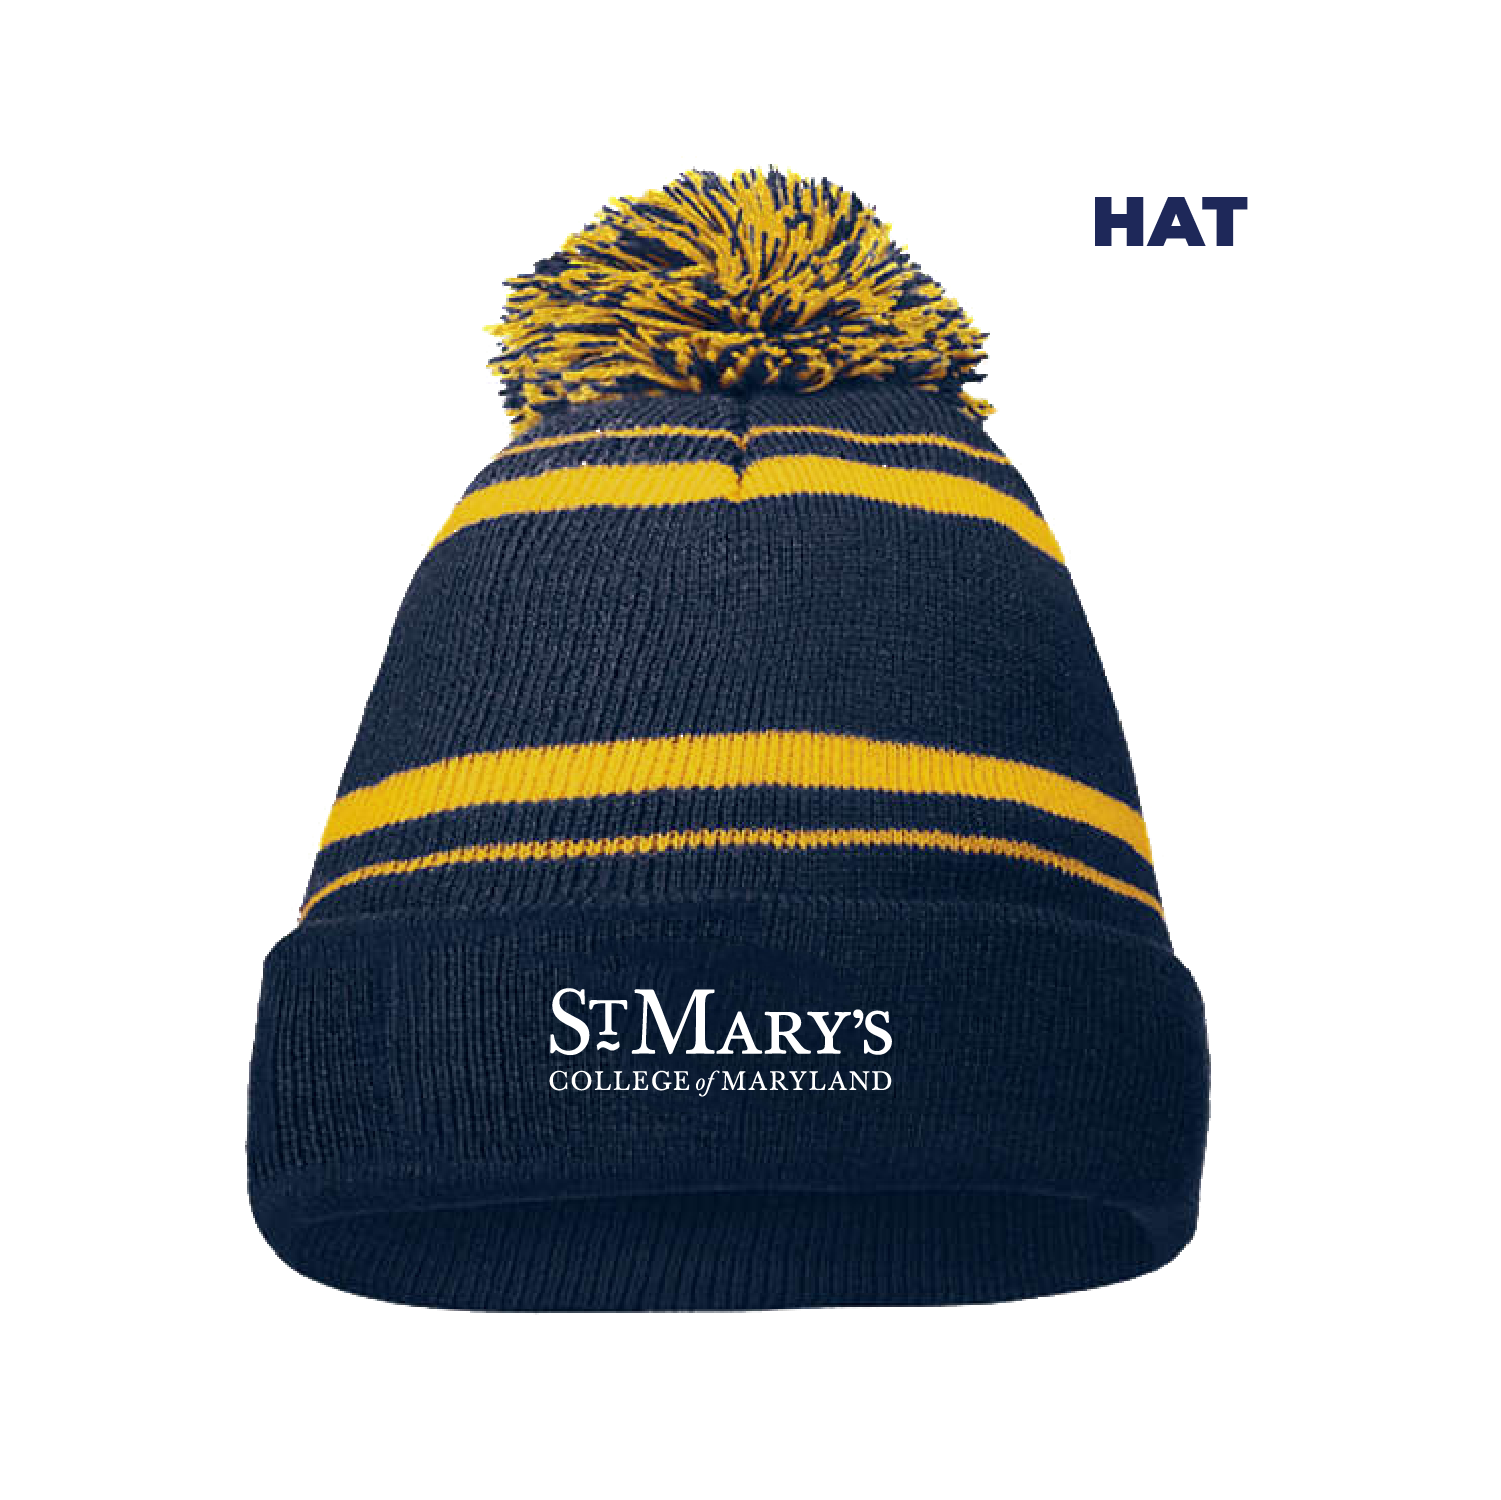 navy winter hat with a navy and gold pom pom with the St. Mary's College of Maryland logo